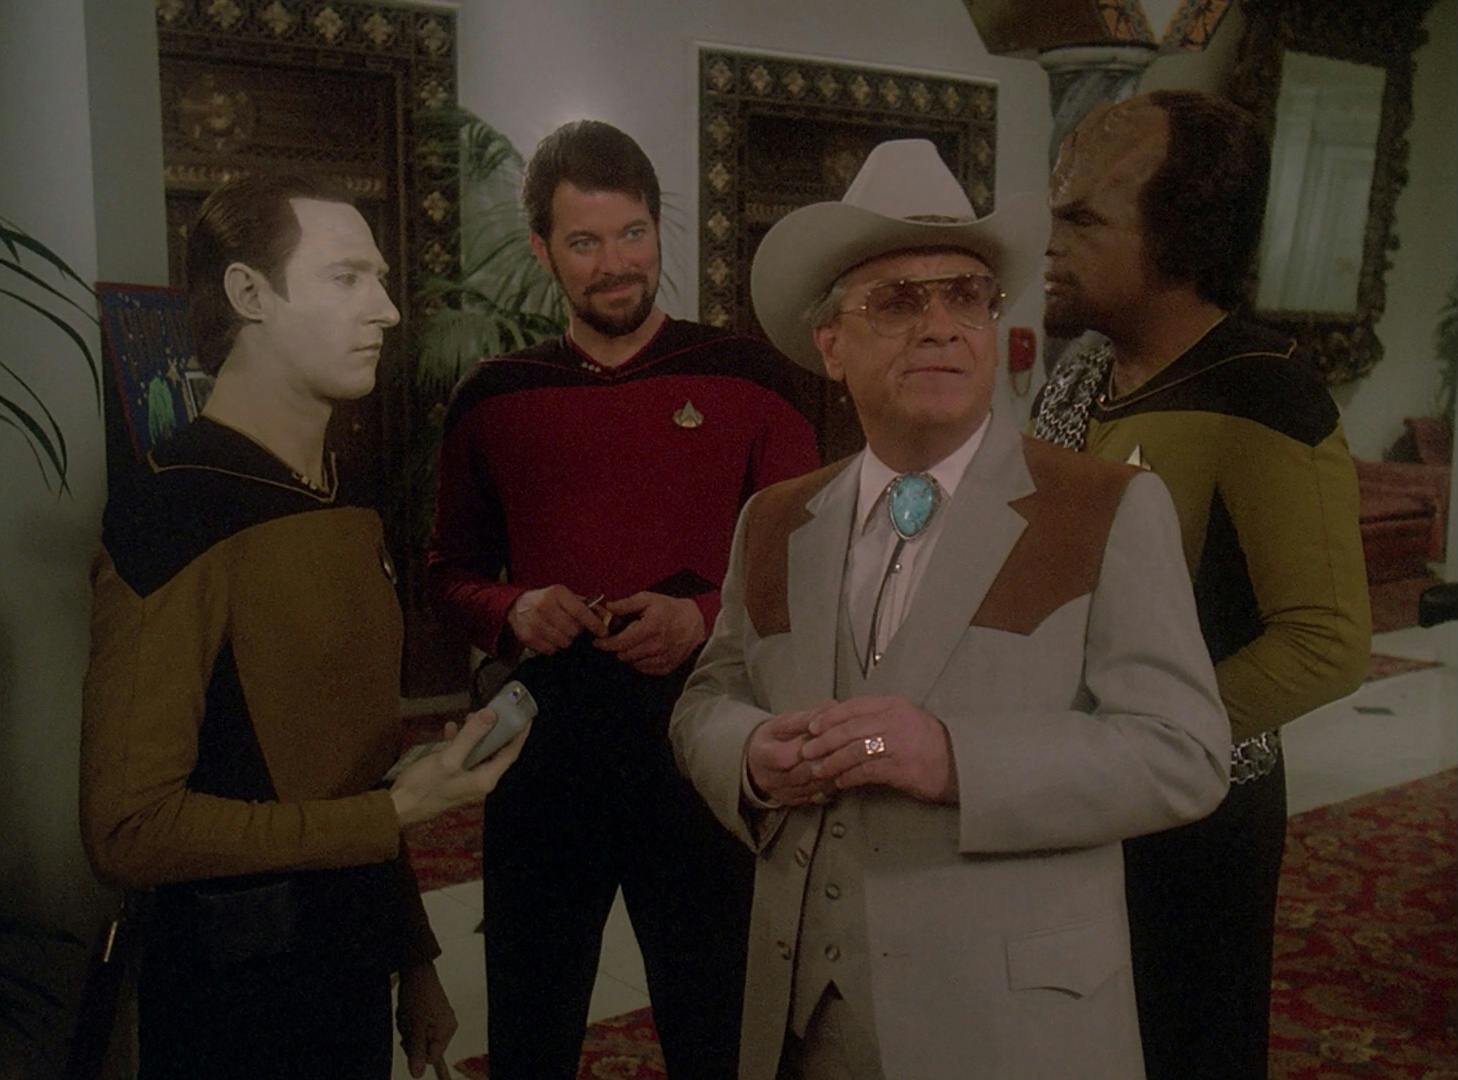 Data, Riker, and Worf arrive at Hotel Royale curious about where they've landed as Data lifts his tricorder towards Sam Anderson in 'The Royale'